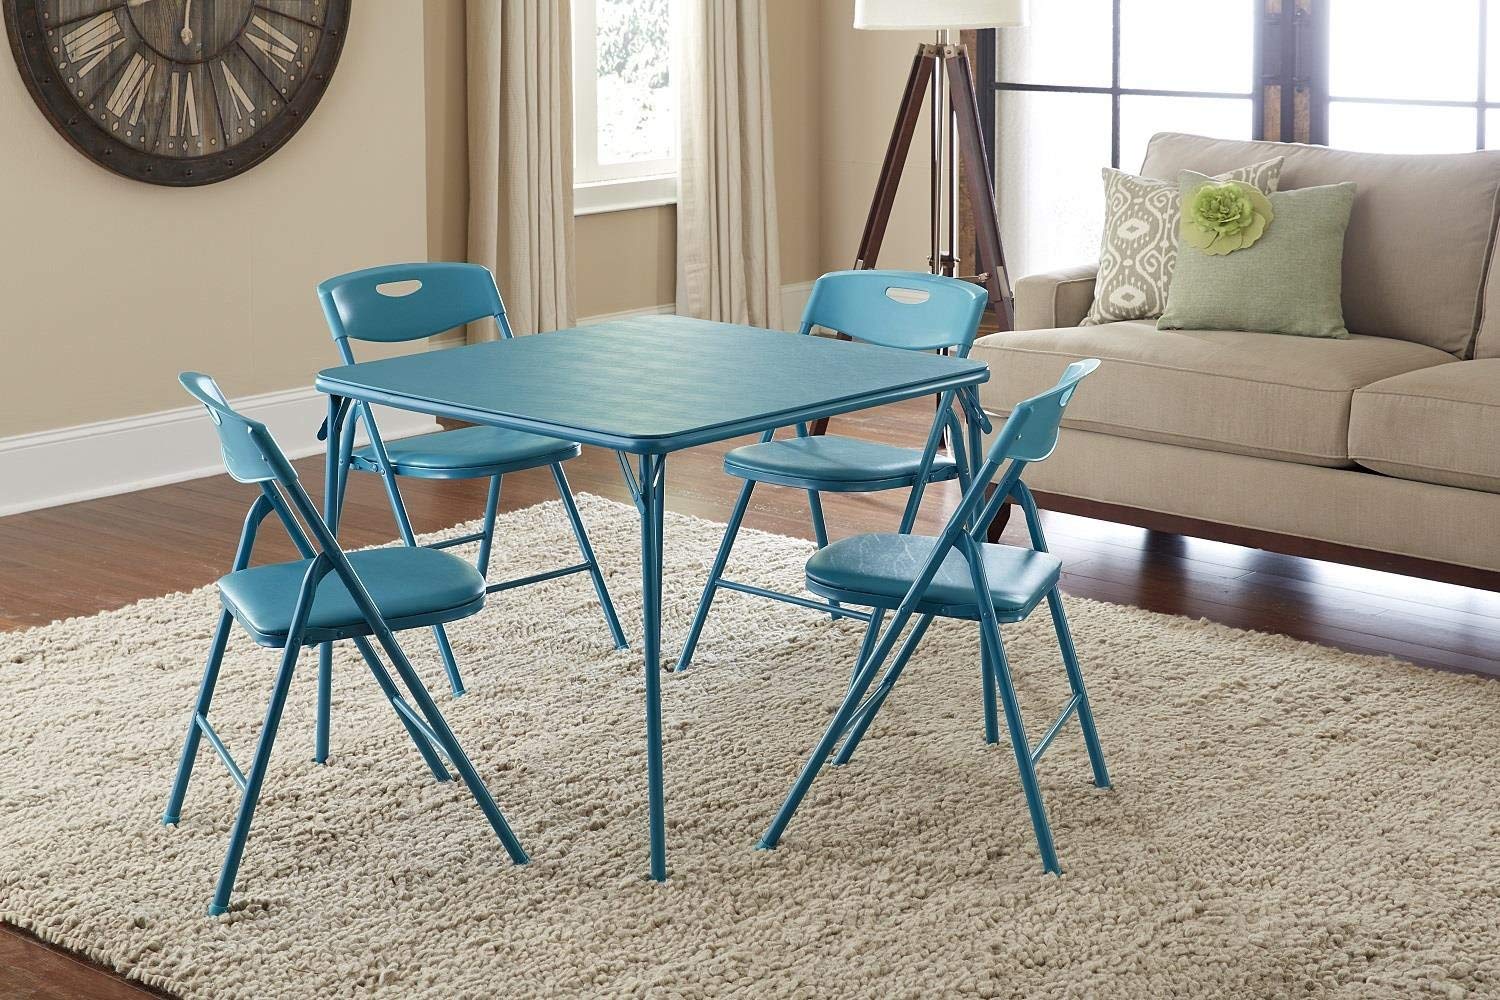 Top 10 Best Folding Table and Chair Sets in 2022 Reviews